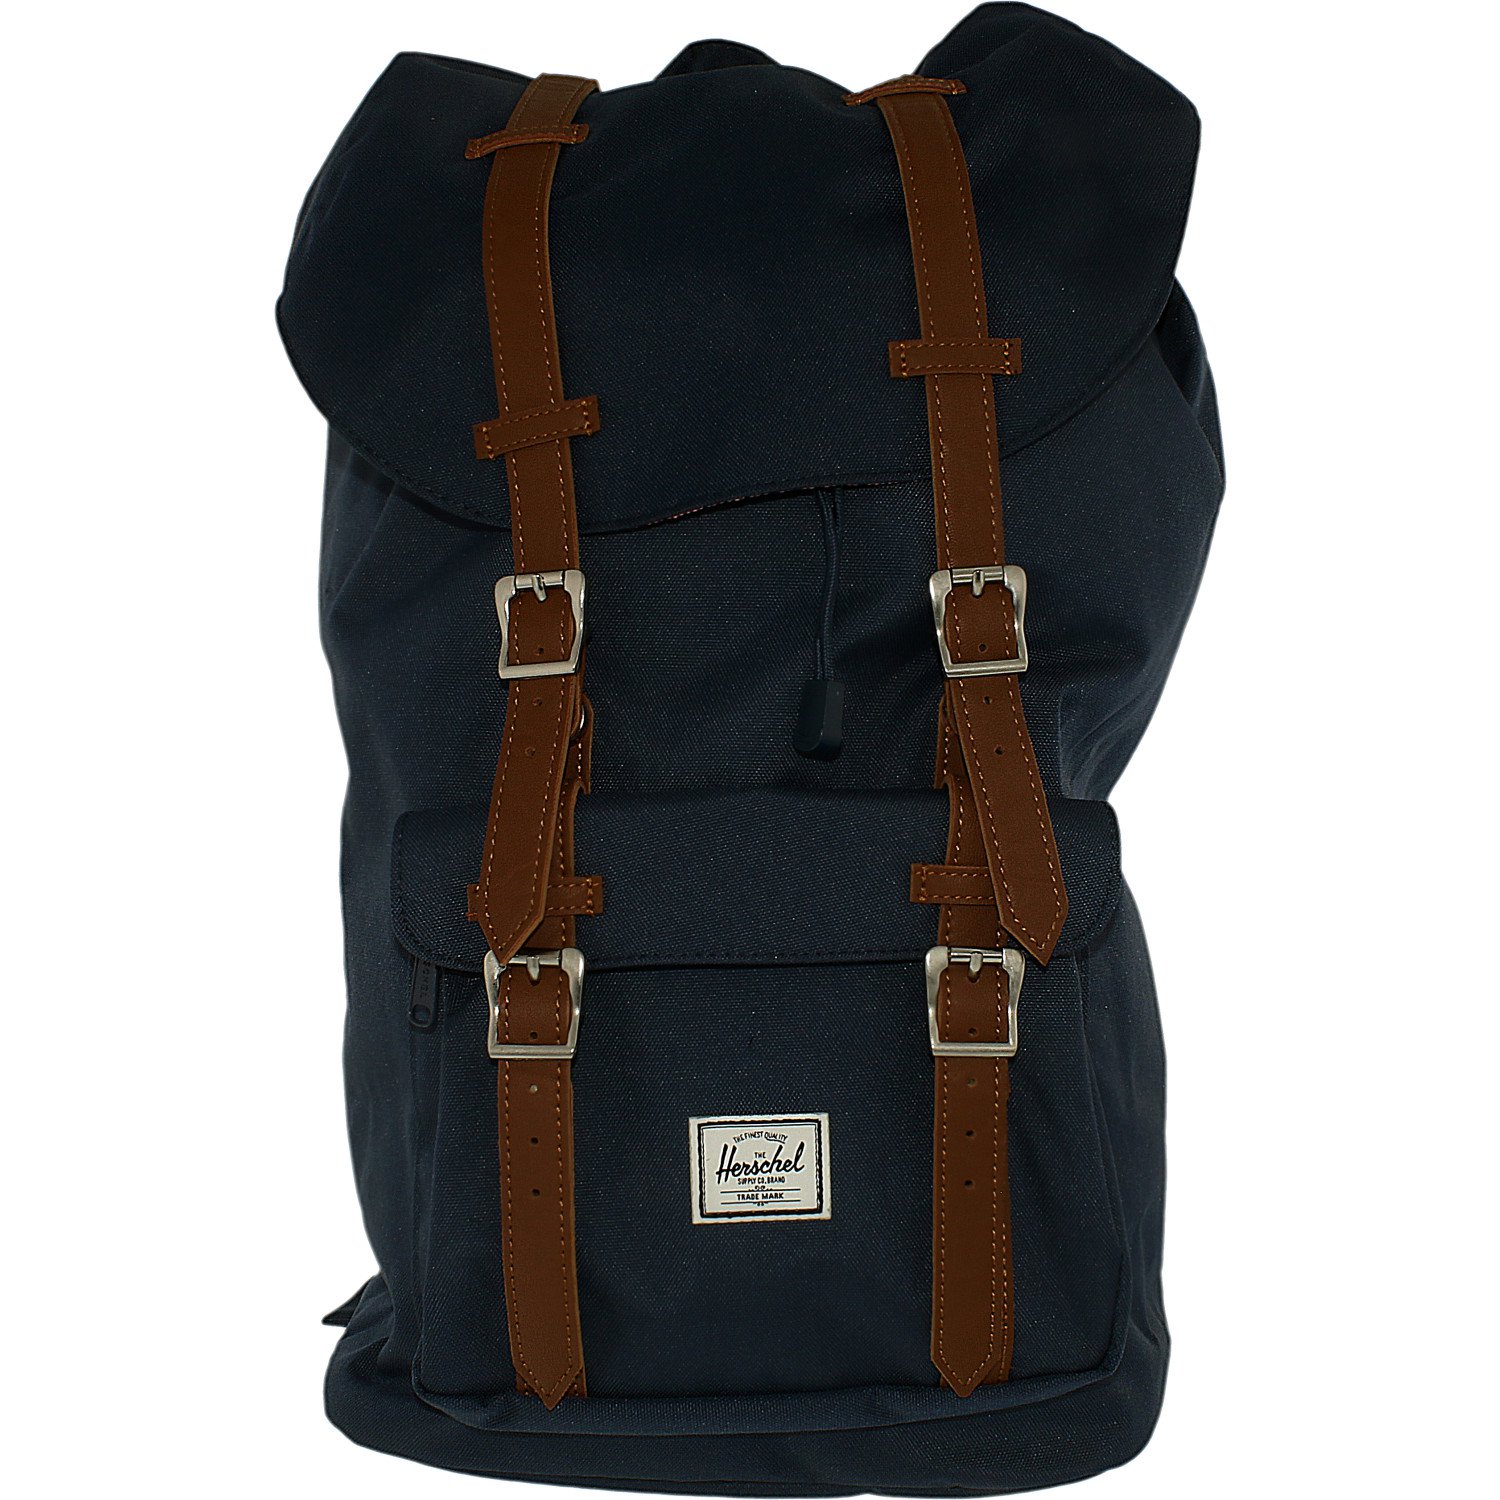 Little America Laptop Backpack - Navy - image 1 of 3